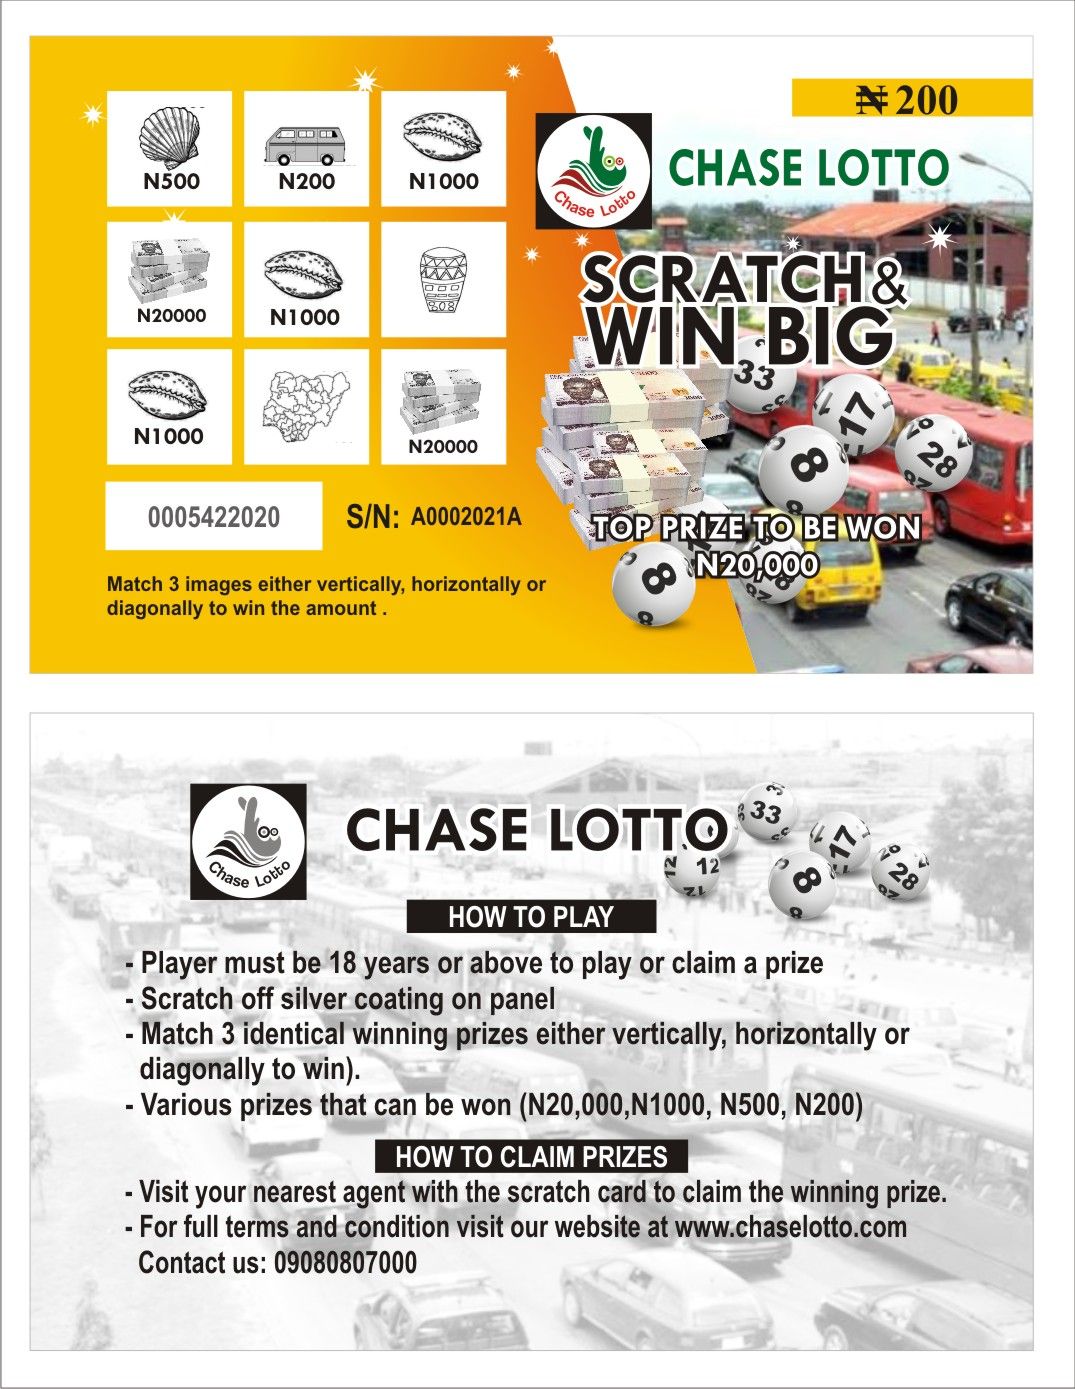 CALL CHINEDU ON 08179652585 TO PRINT QUALITY LOTTERY CARDS